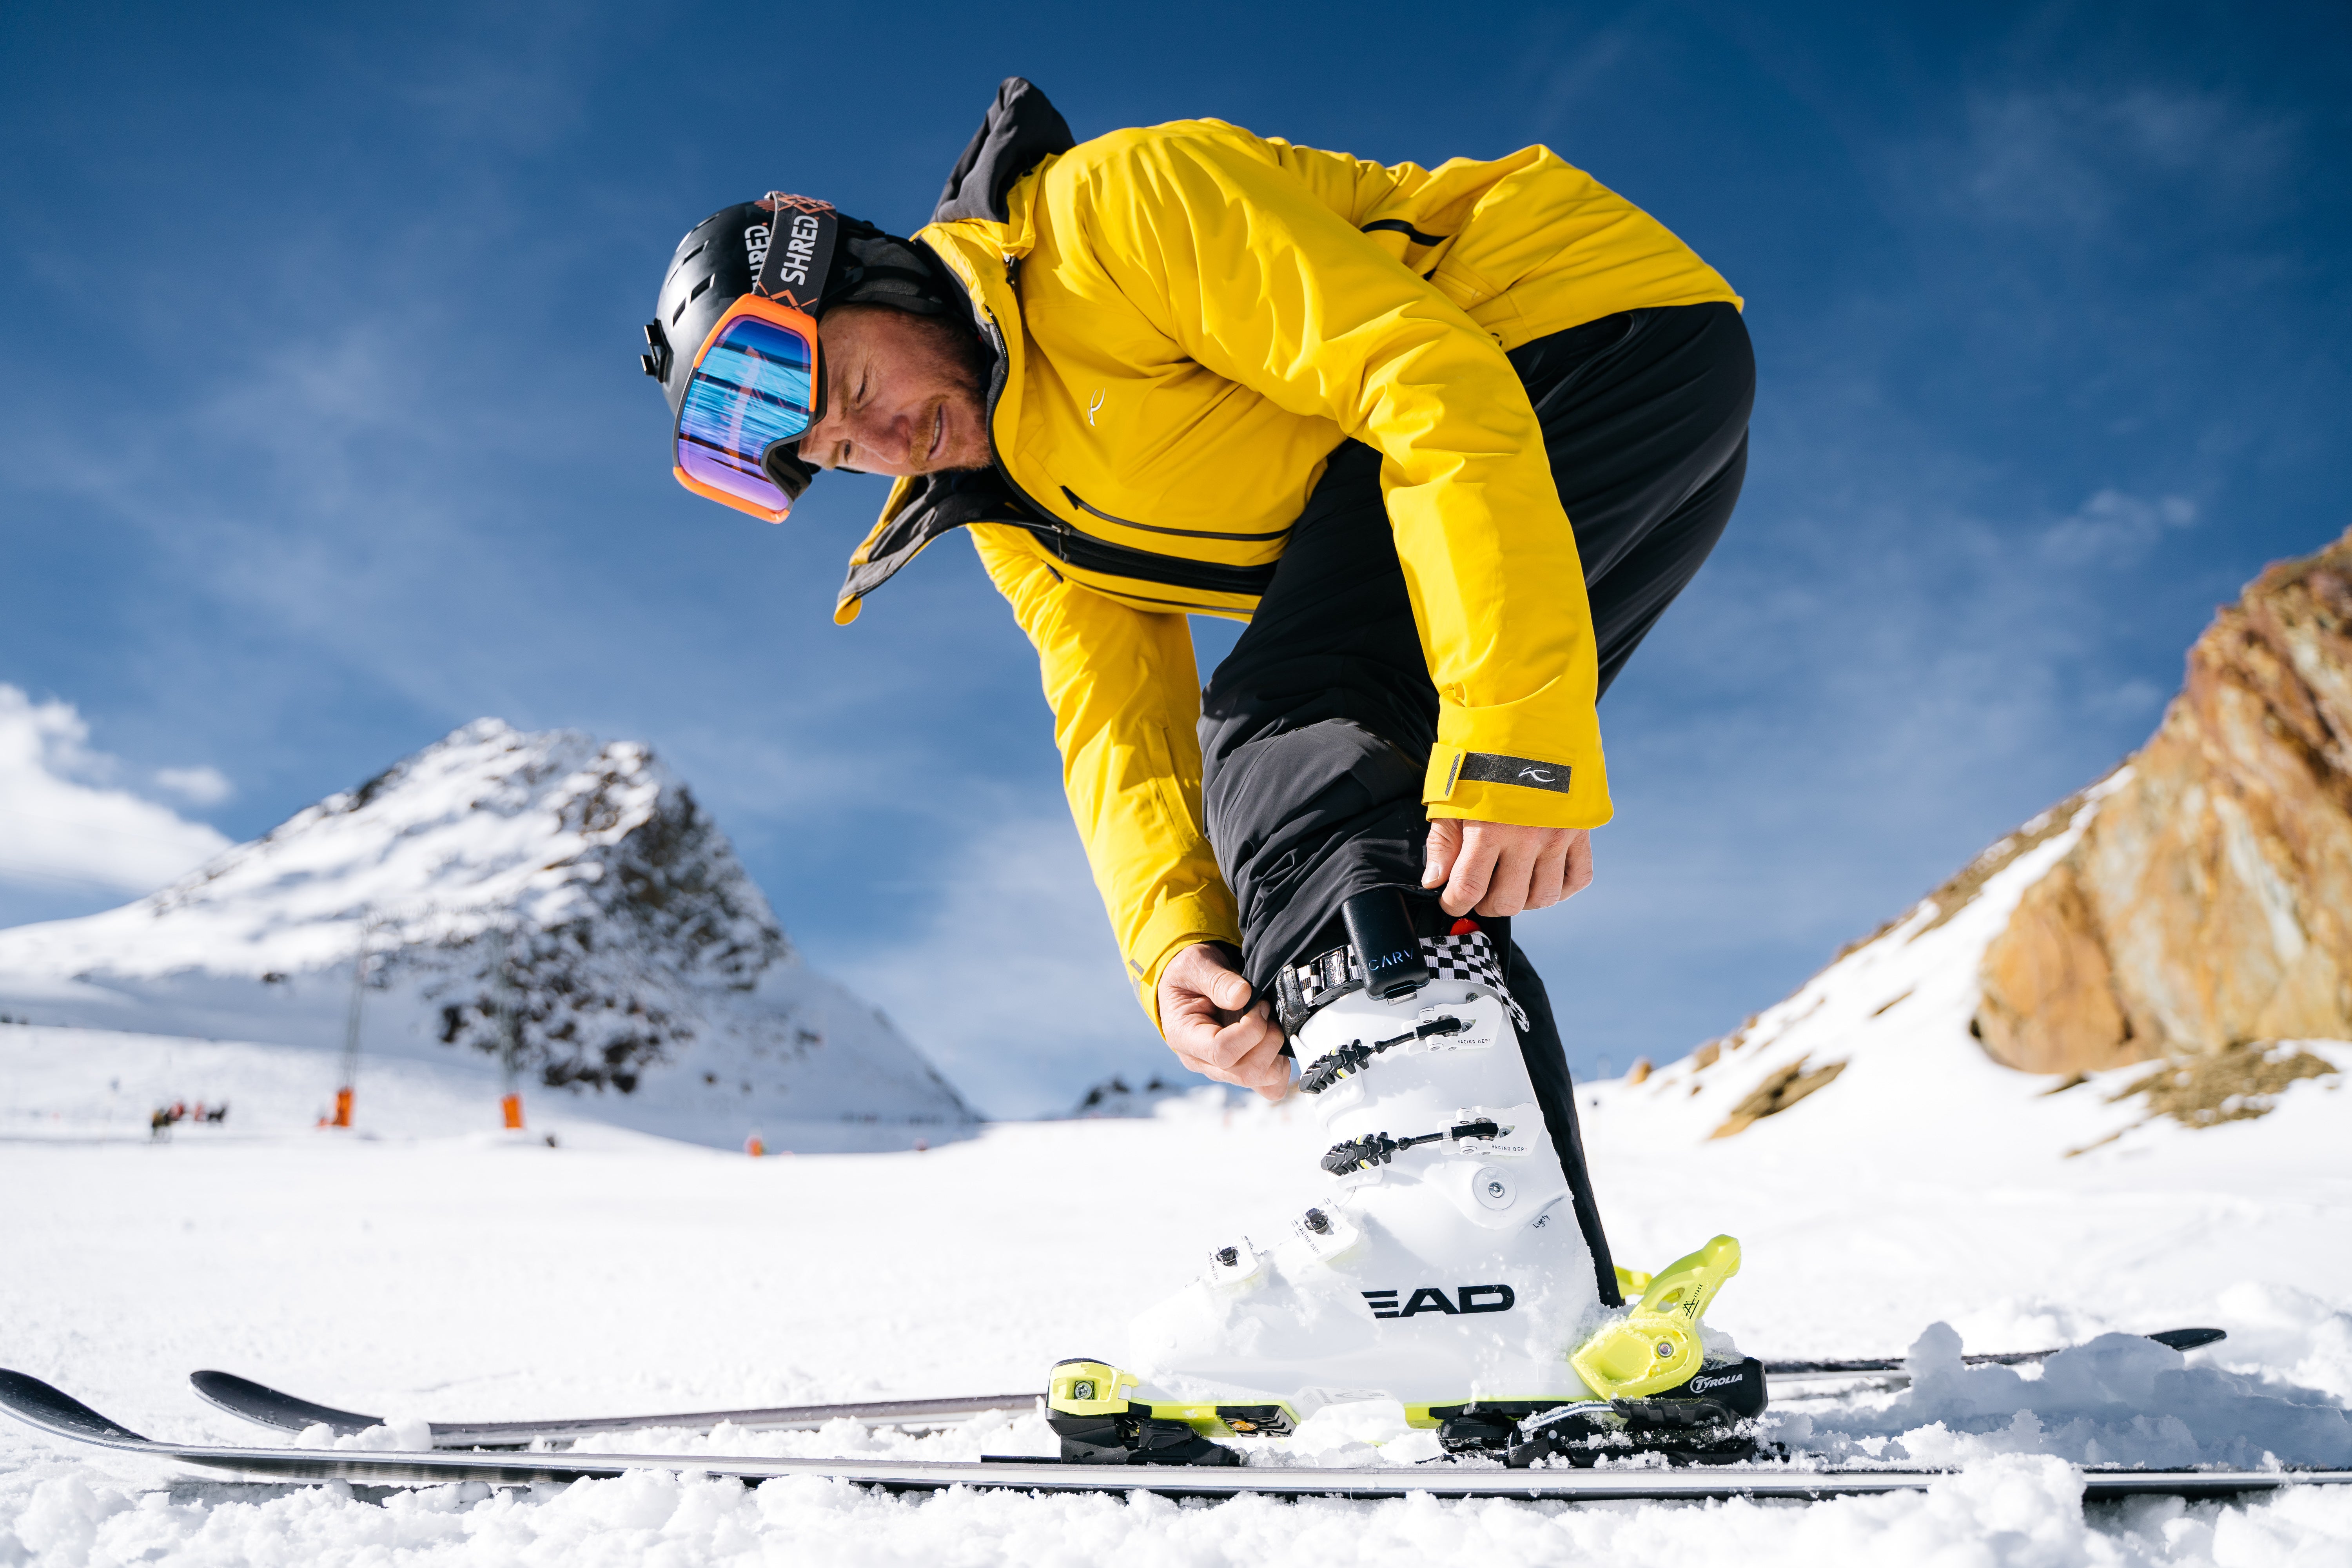 Olympic champion Ted Ligety attaching Carv to his ski boot